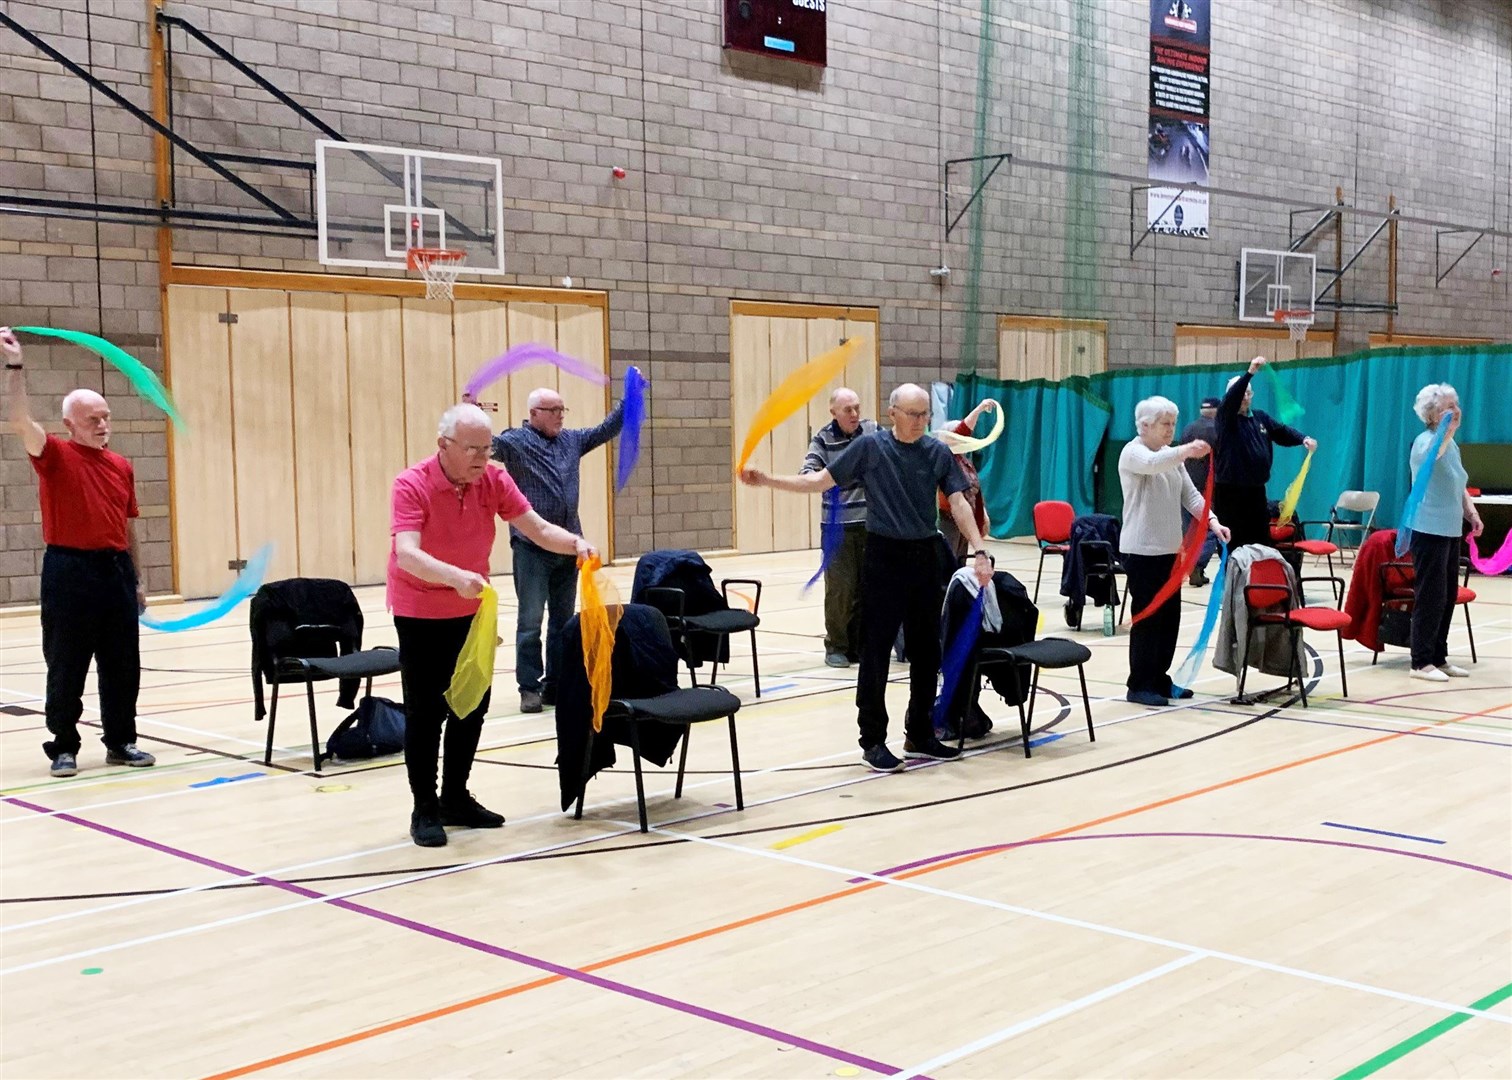 The exercise classes are run at a number of centres, including in Alness and Inverness.